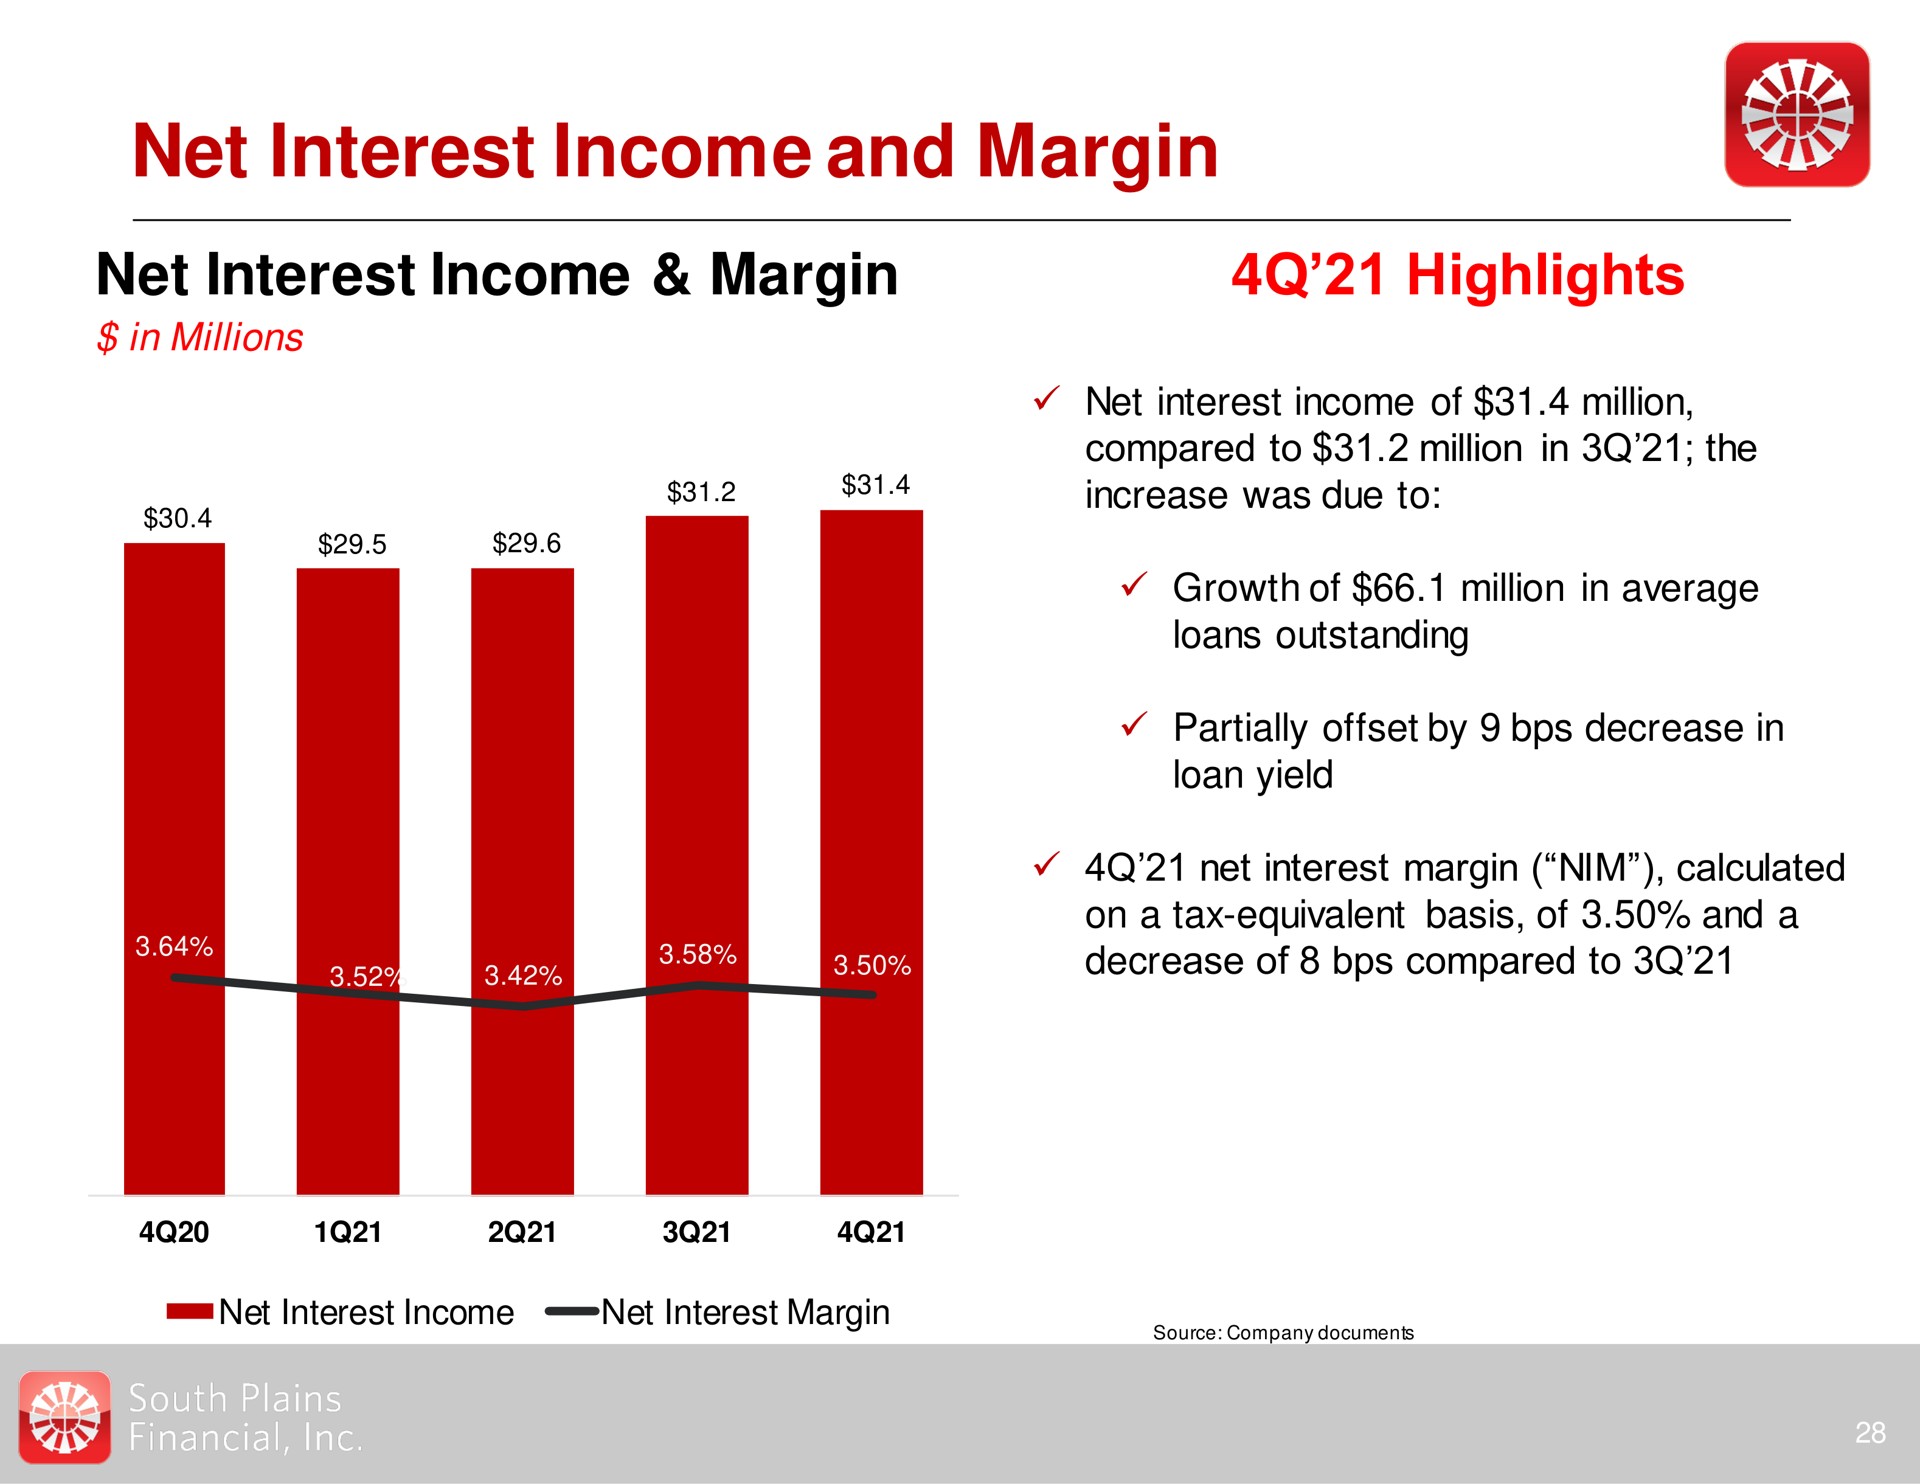 net interest income and margin net interest income margin highlights a | South Plains Financial